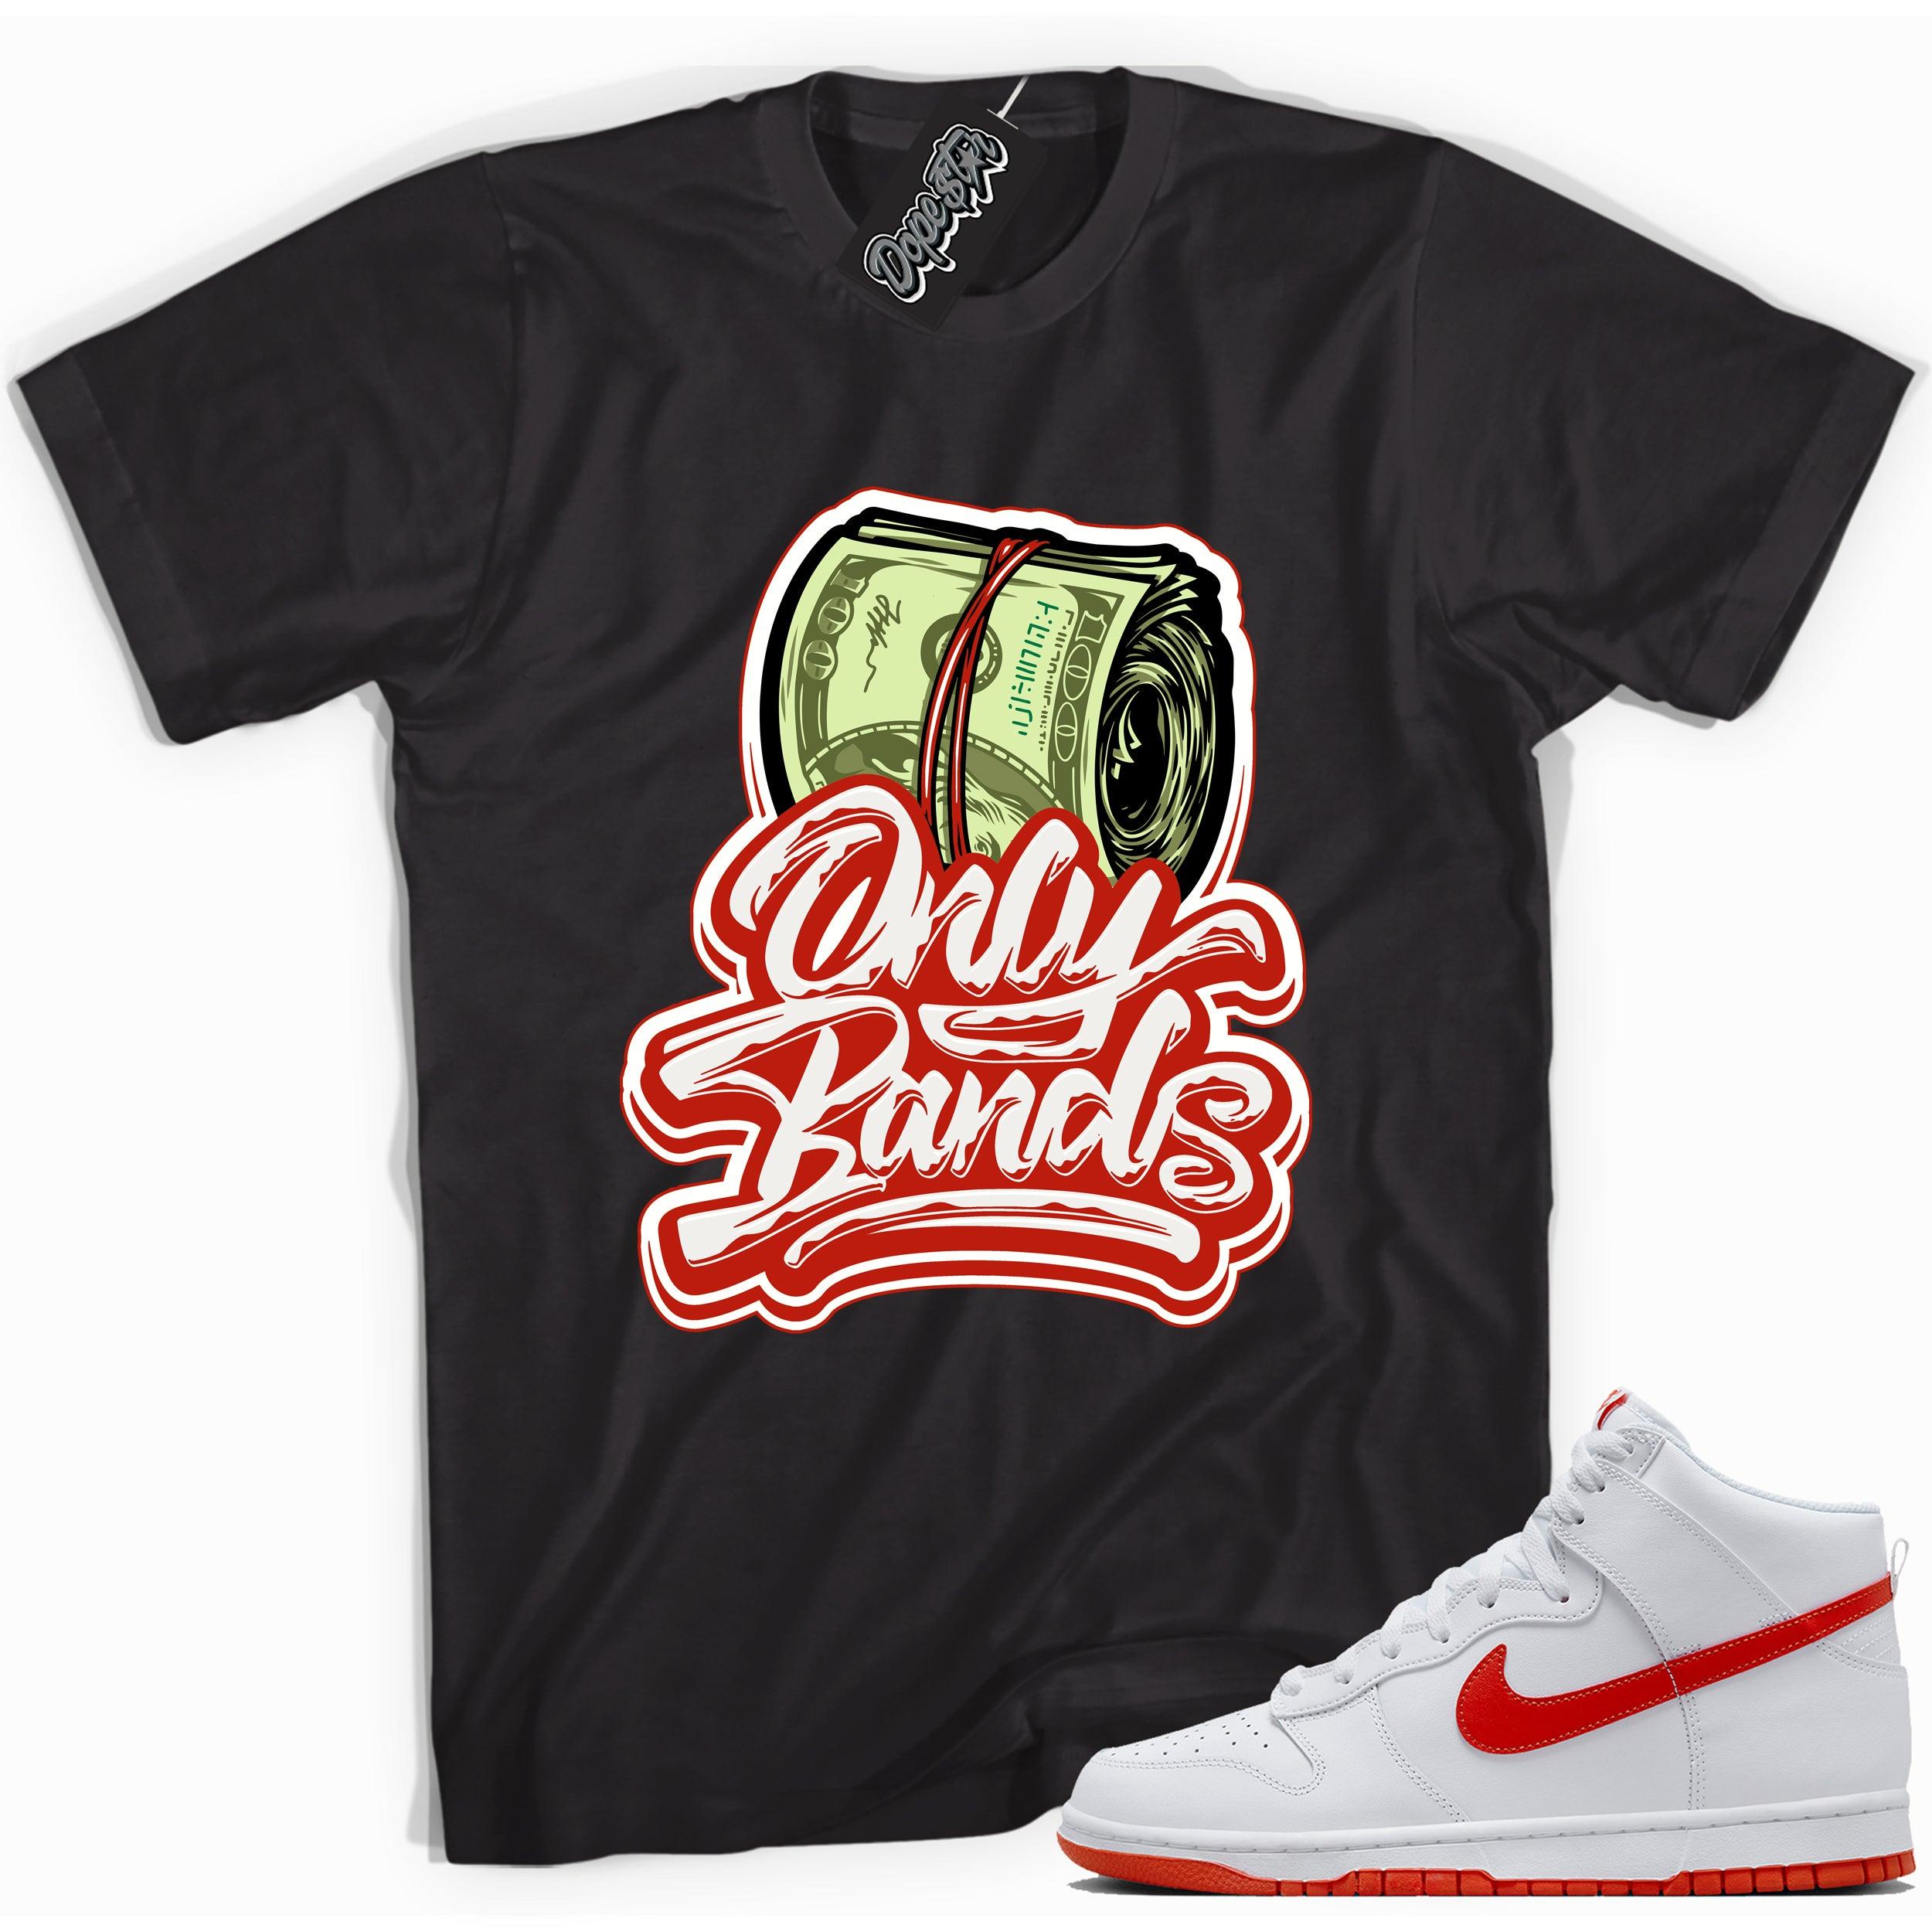 Cool black graphic tee with 'only bands' print, that perfectly matches Nike Dunk High White Picante Red sneakers.